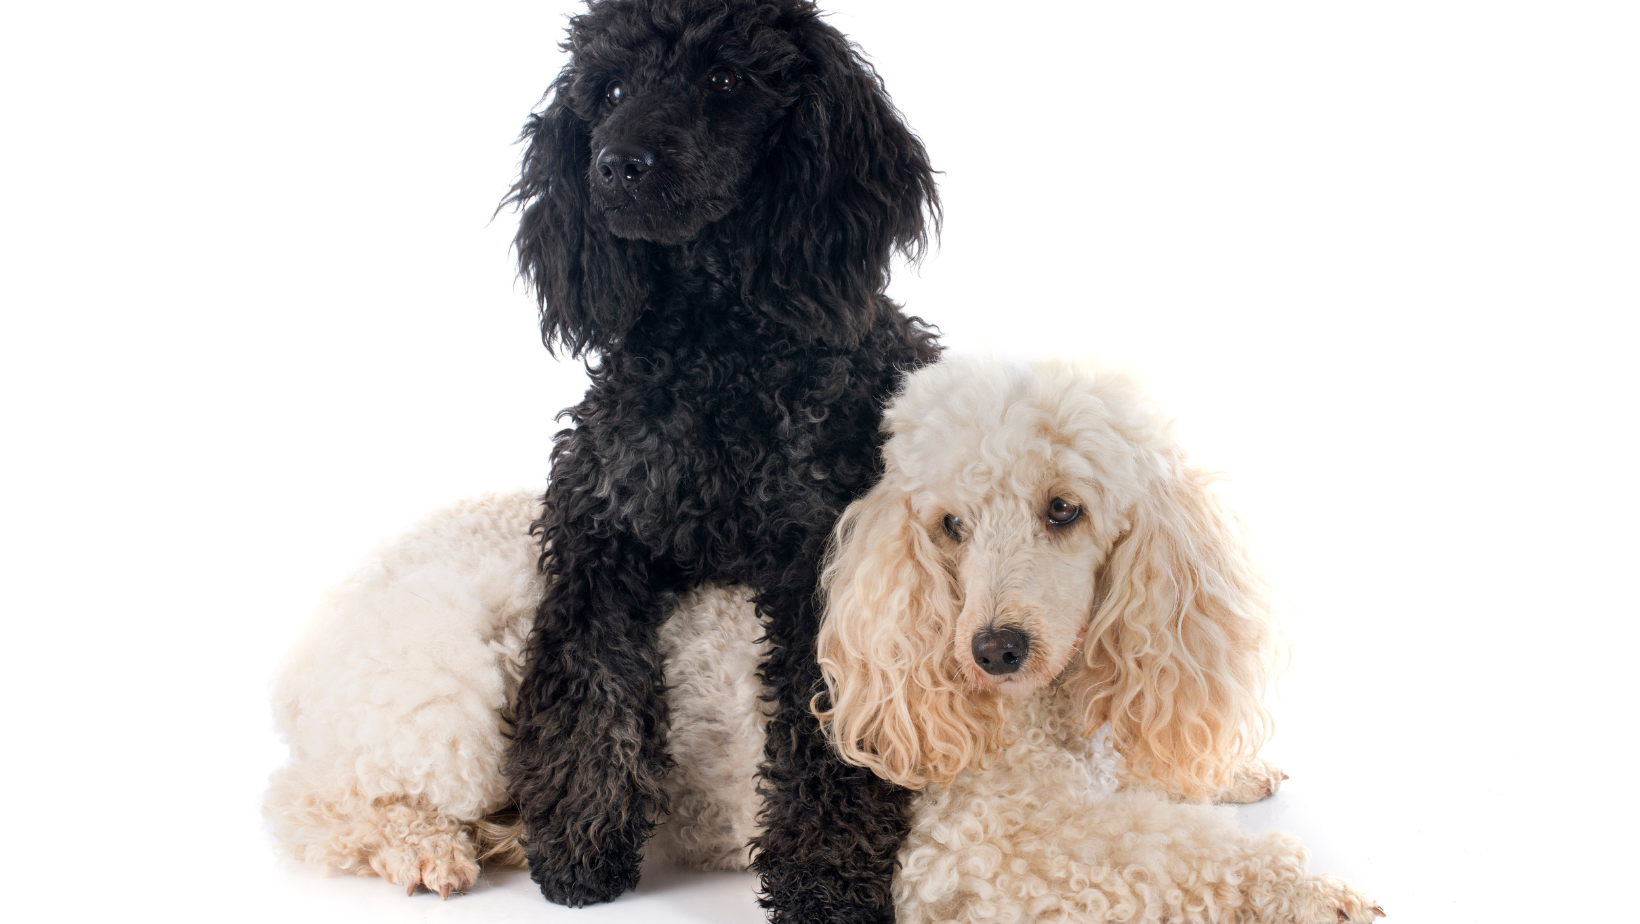 Can Purebred Poodles Be Multicolored? Yes, 2 & 3 Colors